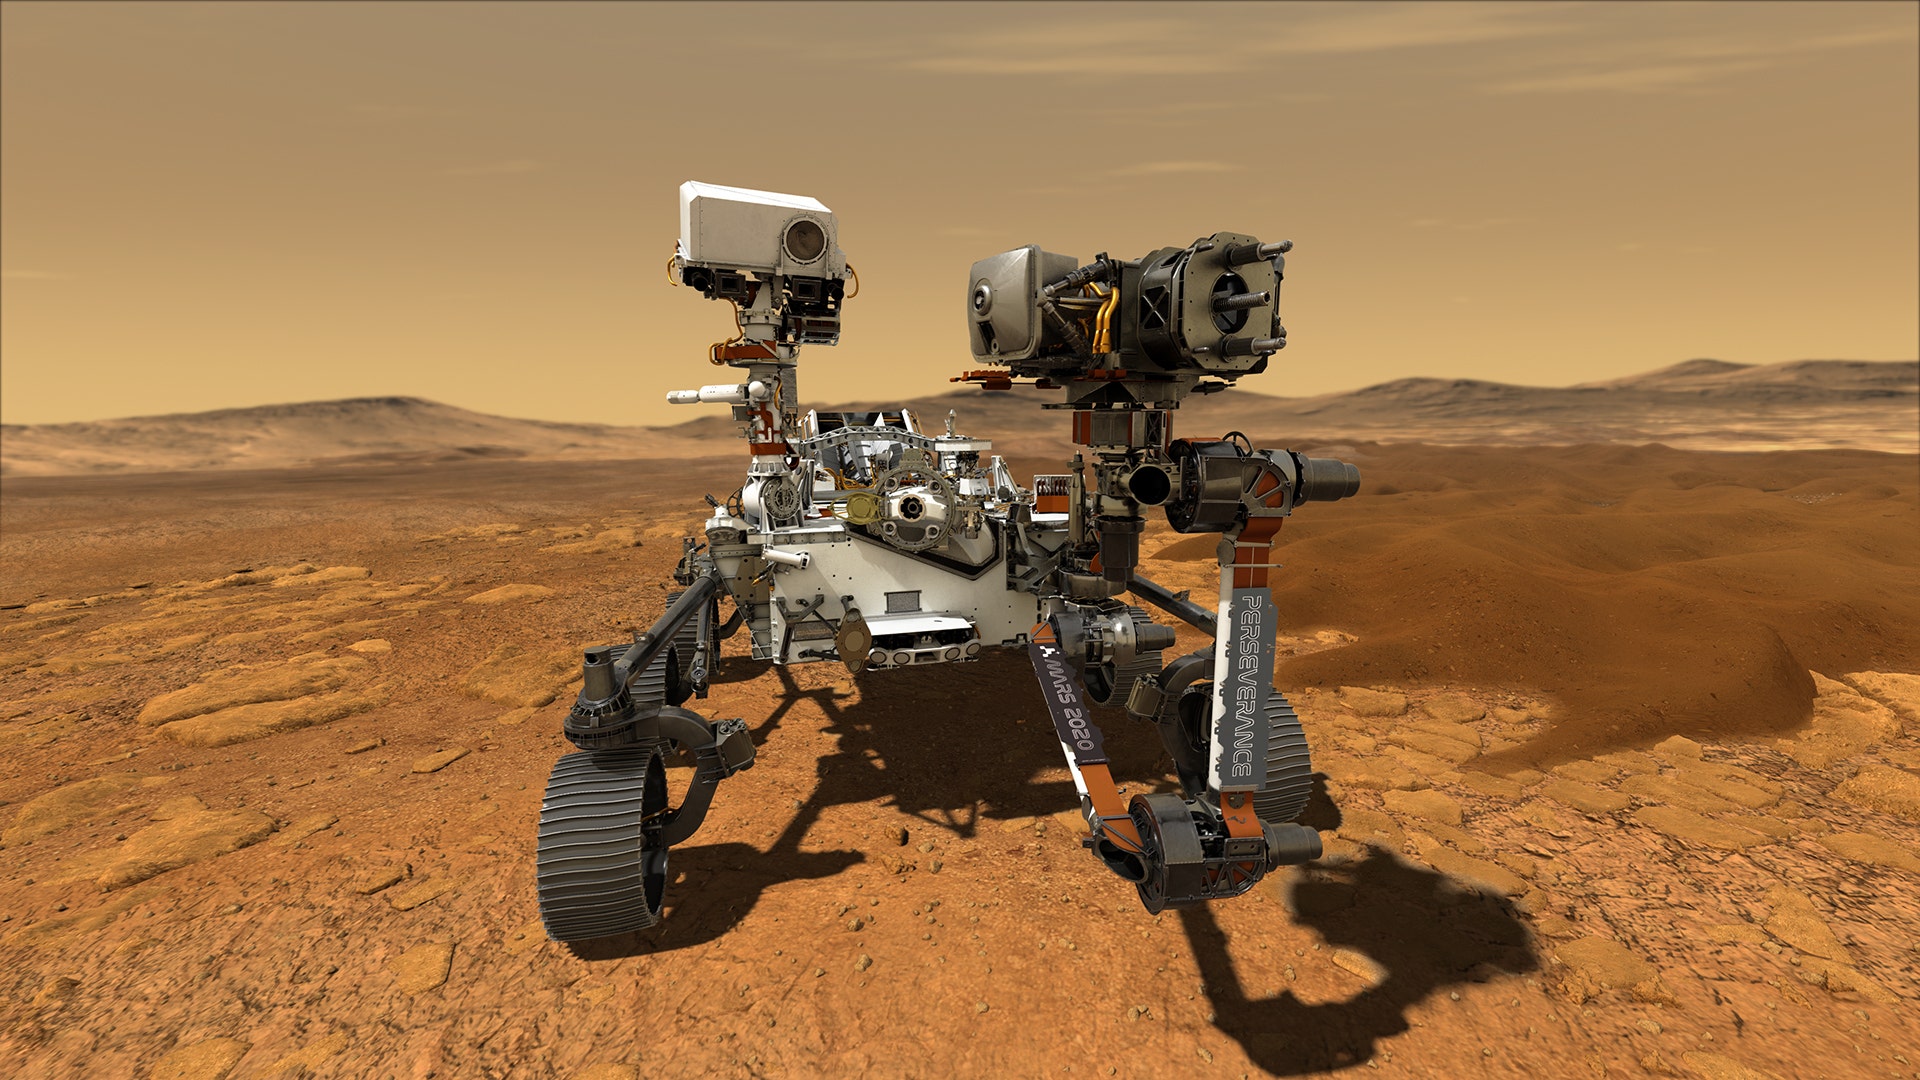 NASA's Perseverance rover is ready to land on Mars